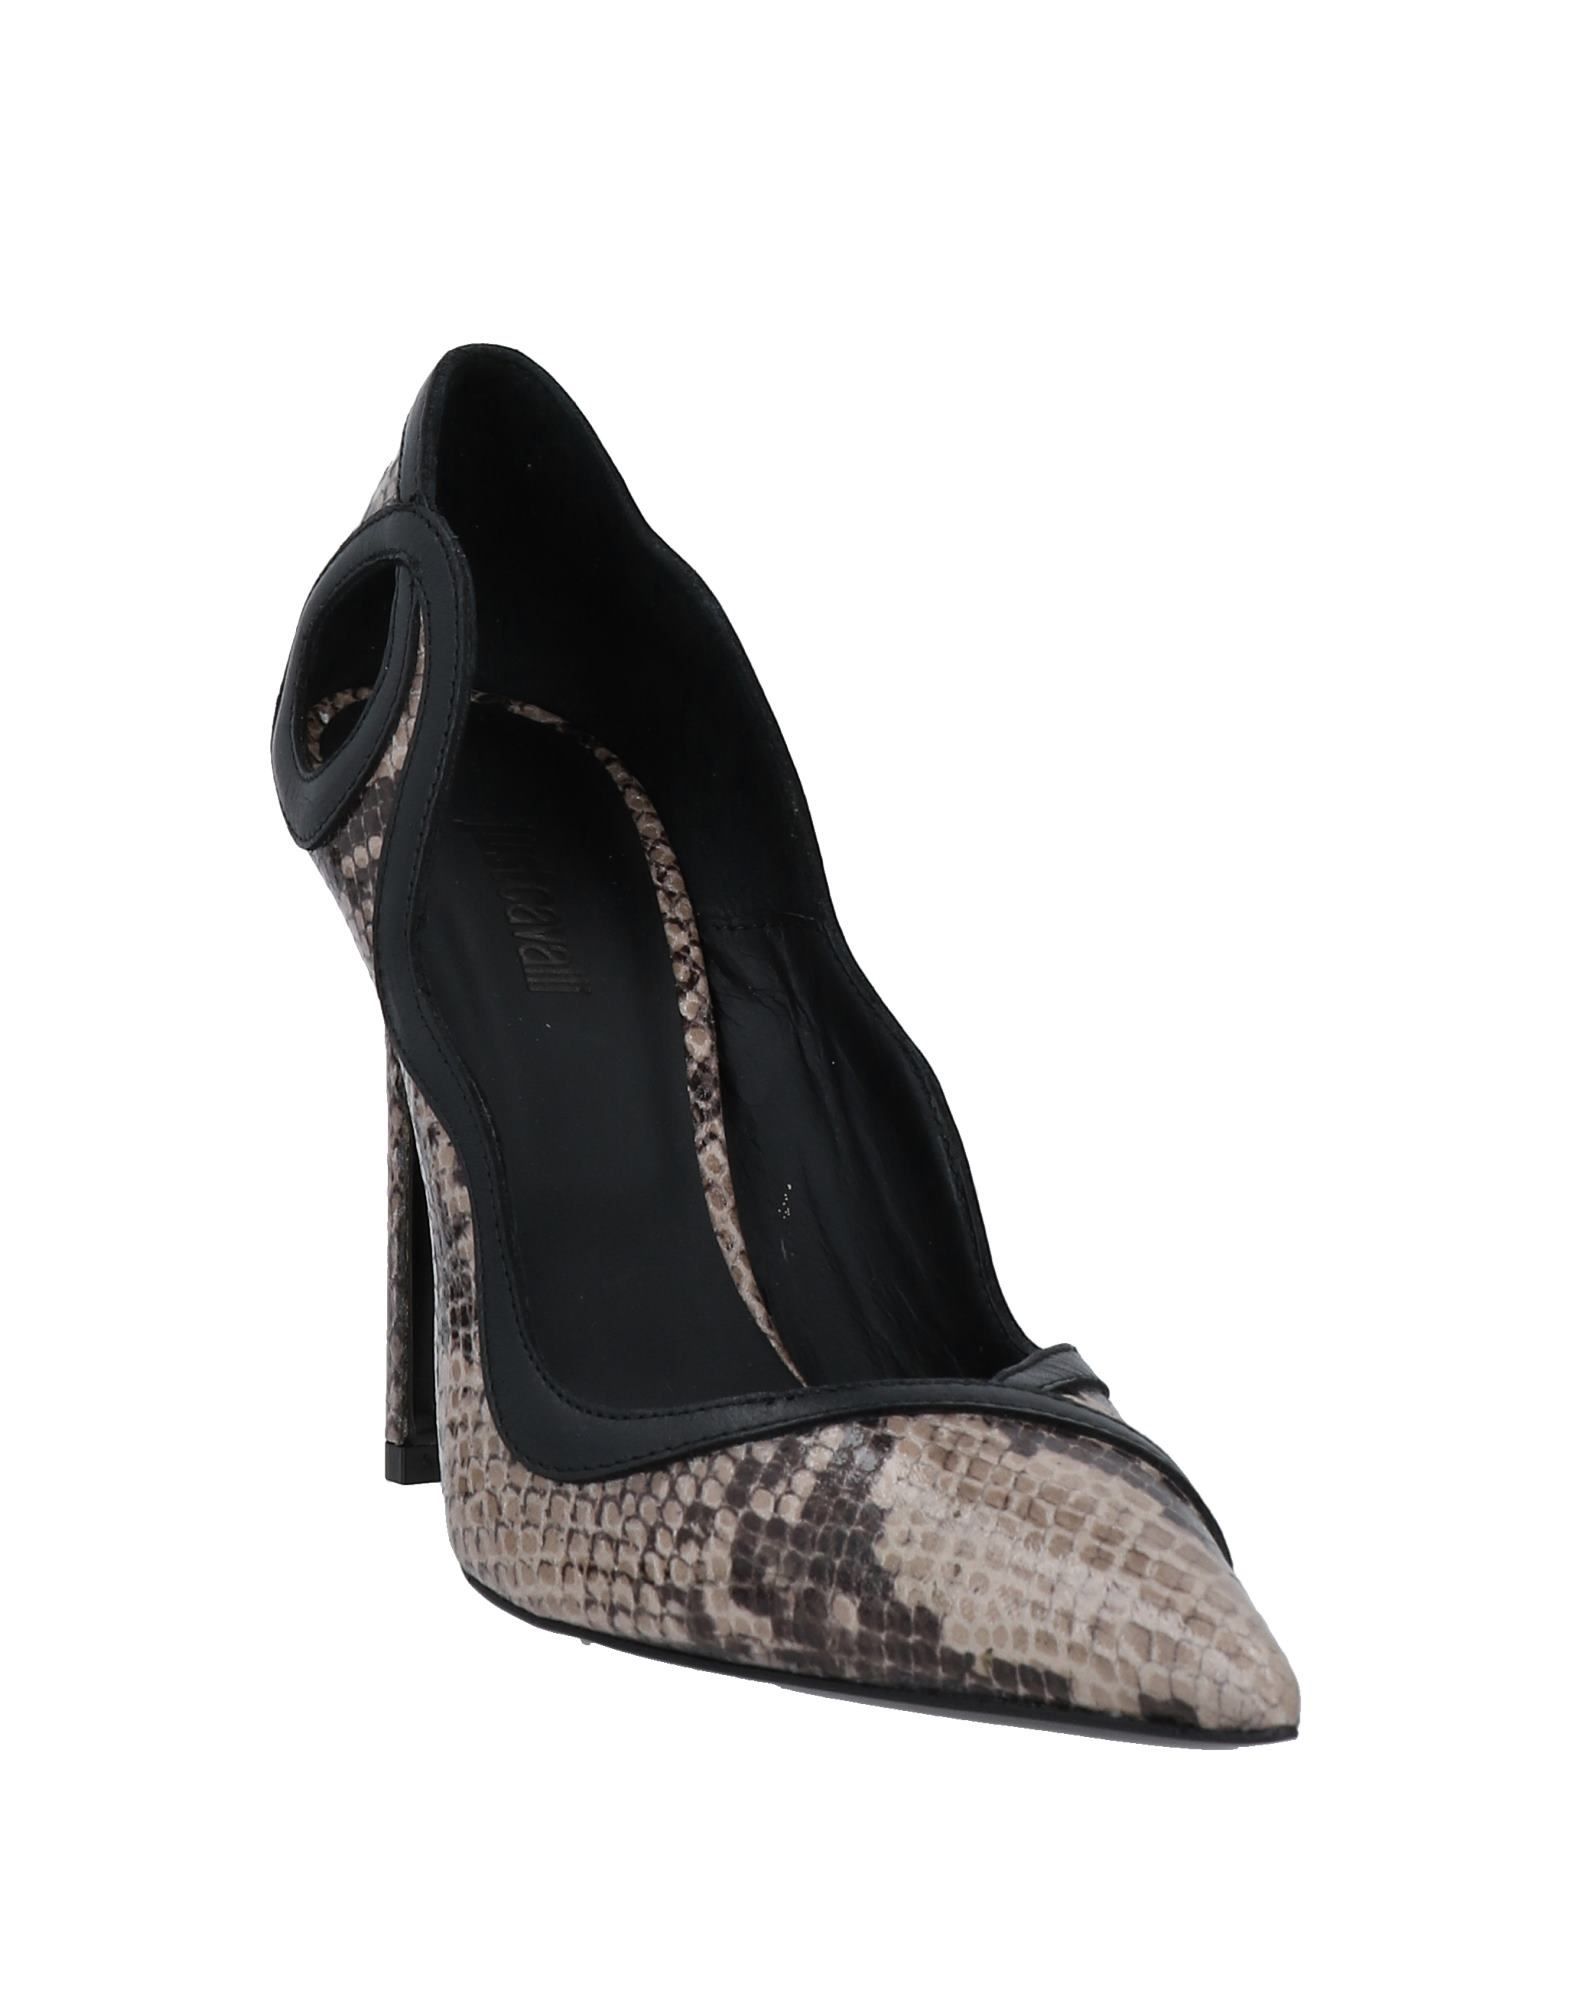 leather, snakeskin print, no appliqués, two-tone, narrow toeline, stiletto heel, leather lining, leather sole, contains non-textile parts of animal origin